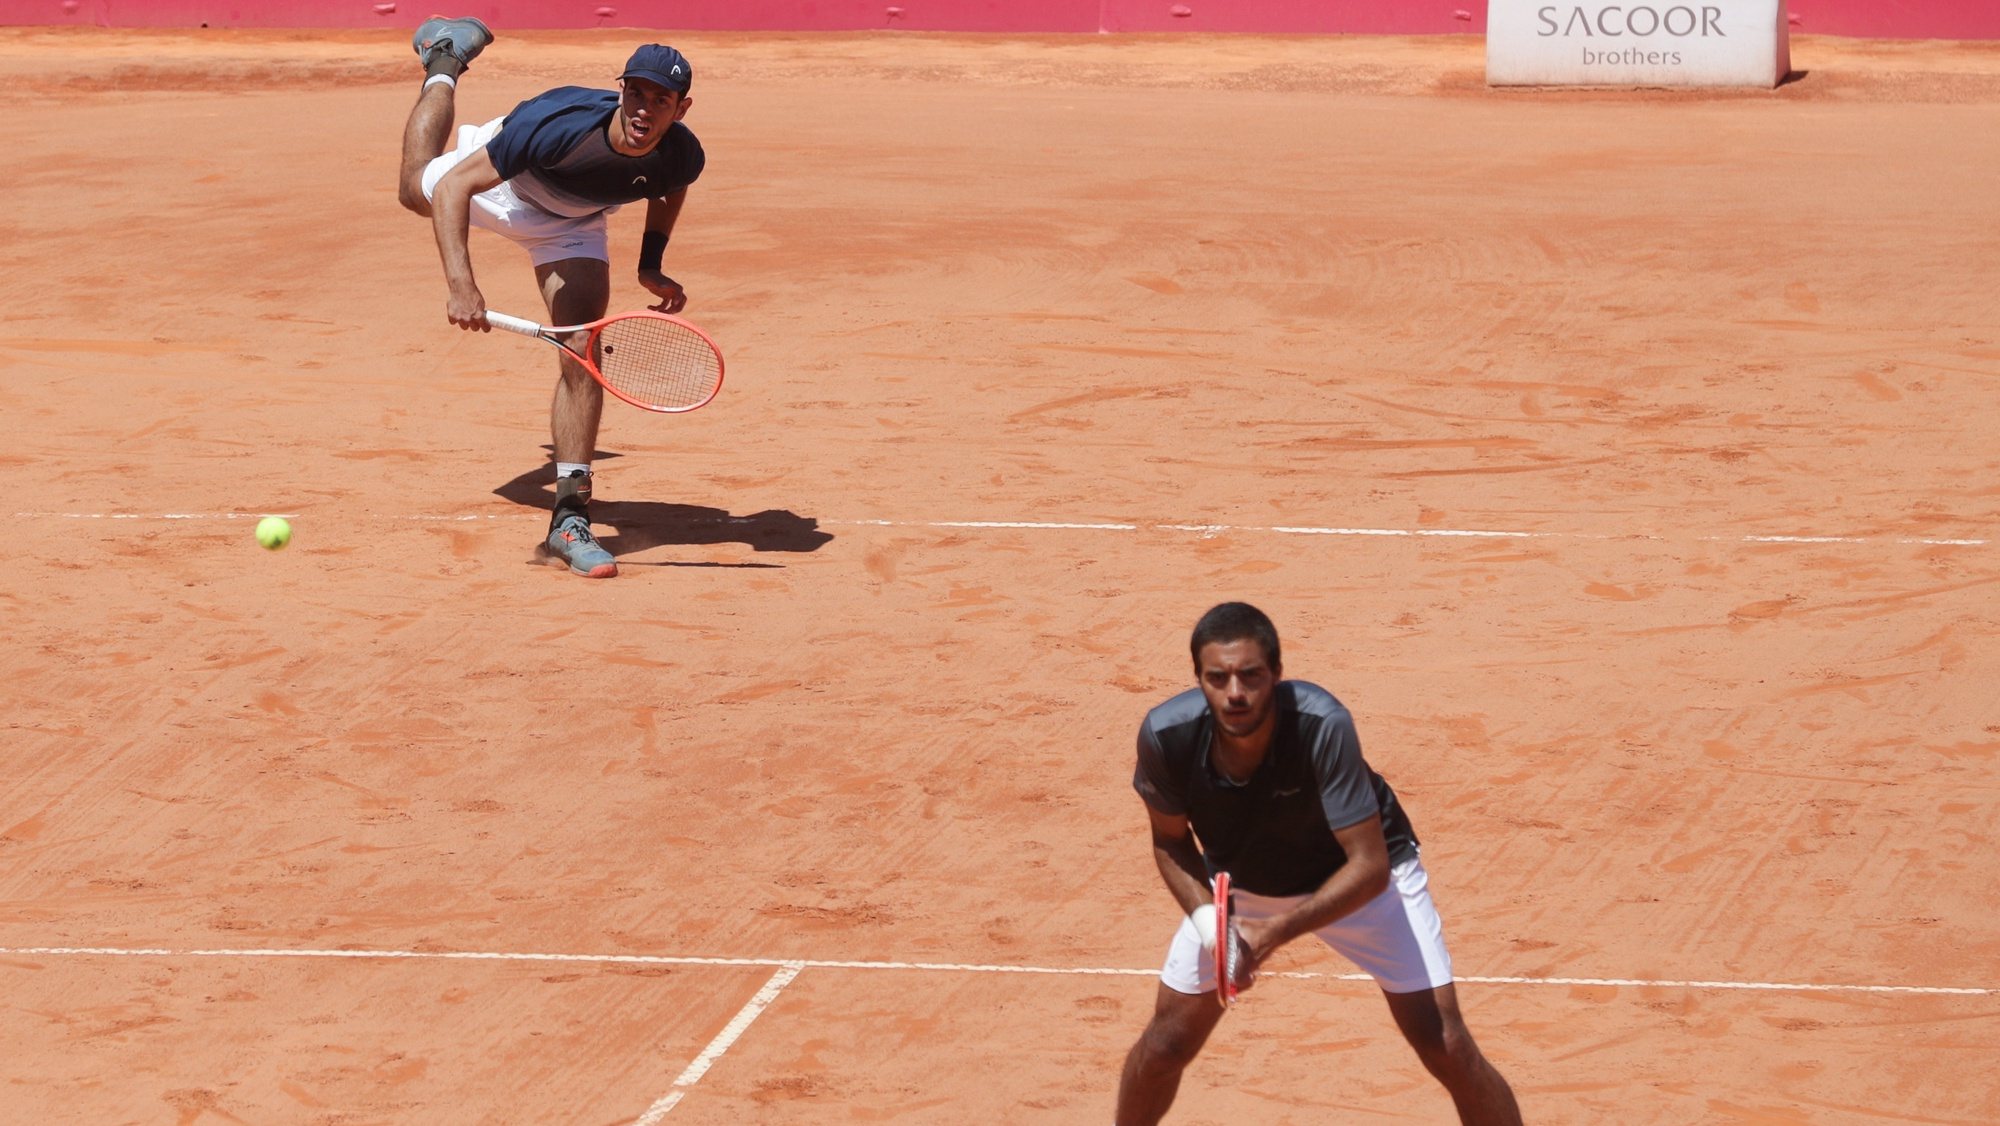 The pair of Portuguese tennis players Nuno Borges (L) and Francisco Cabral in action during the doubles final of the 2022 Estoril Open tournament against the pair composed by Maximo Gonzalez and Andre Goranssonin, Estoril, near Lisbon, Portugal, 1st May 2022. TIAGO PETINGA/LUSA